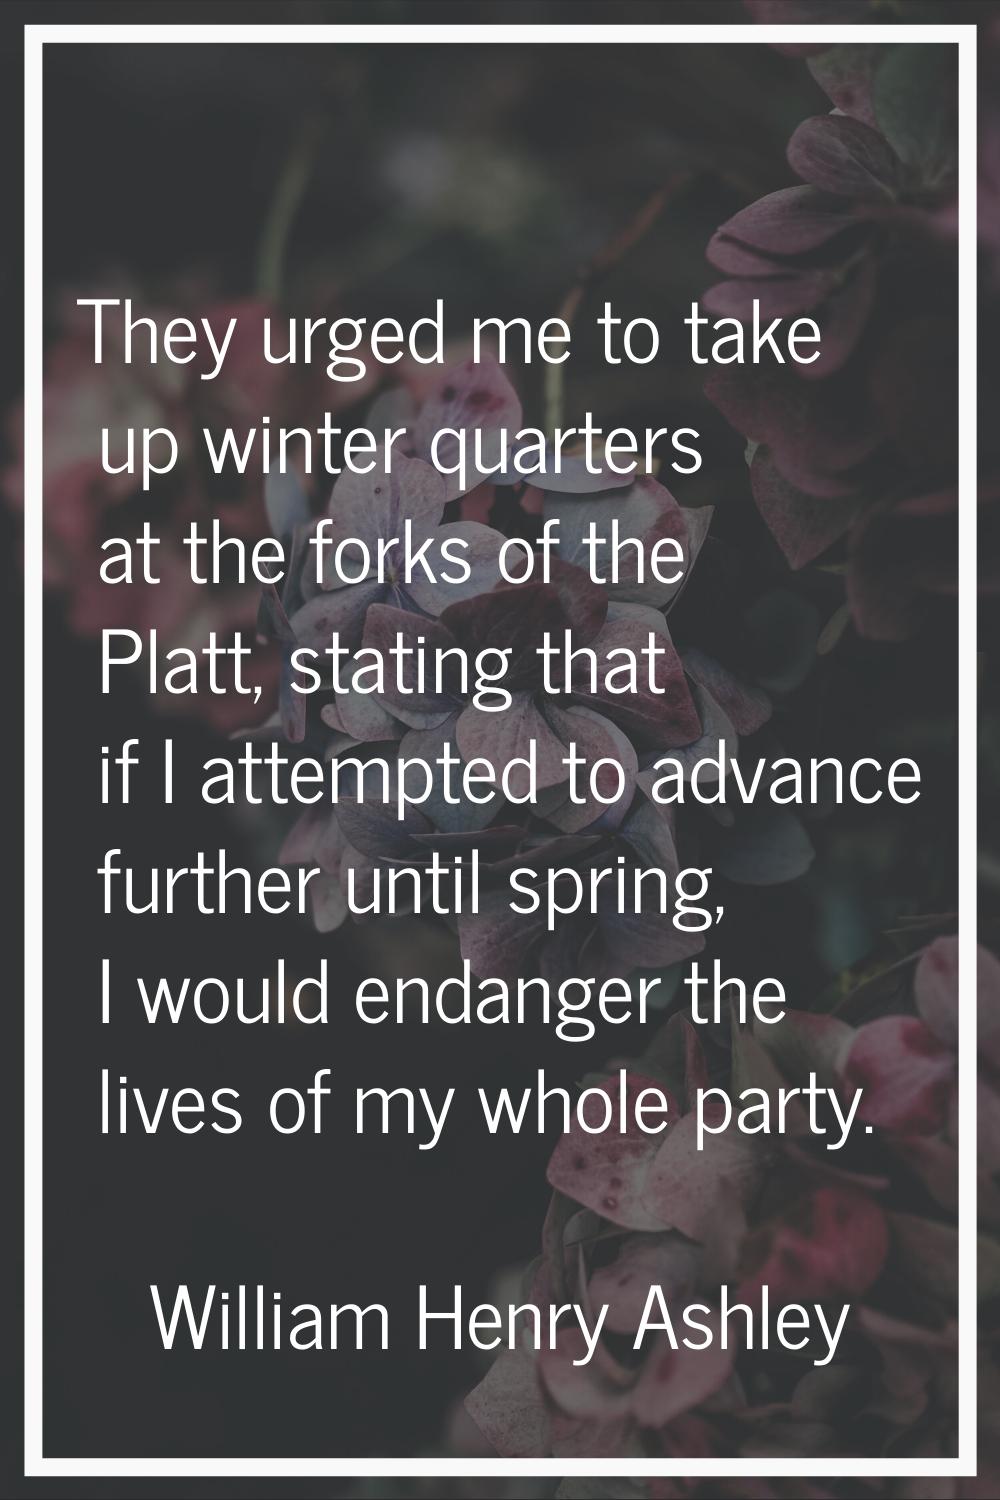 They urged me to take up winter quarters at the forks of the Platt, stating that if I attempted to 